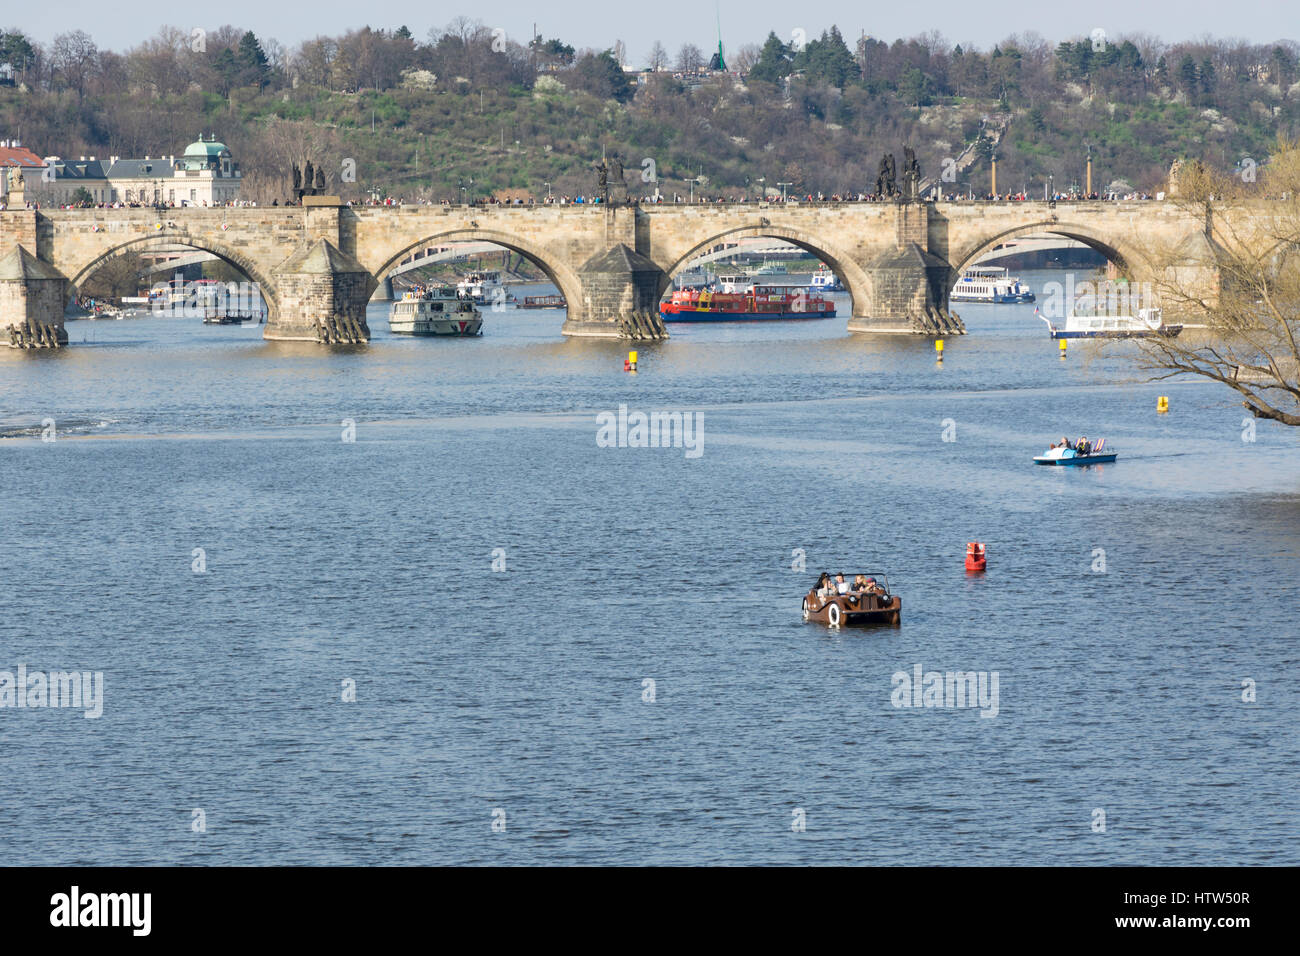 Charles bridge and tourists in pedal boats in Vltava River, Prague, Czech Republic, Europe Stock Photo